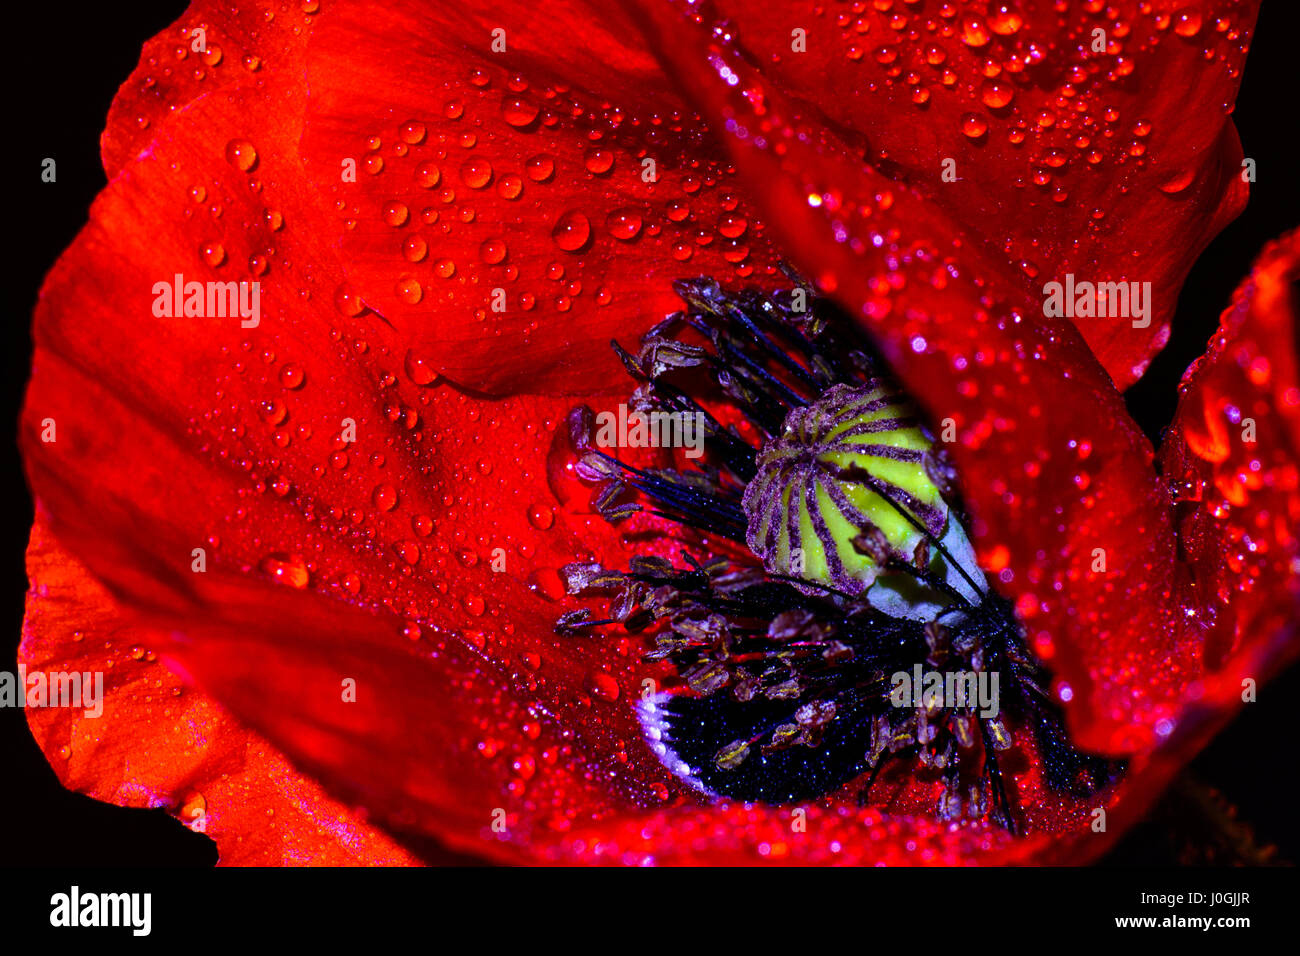 red Poppy (Papaver rhoeas) close-up against a black background Stock Photo